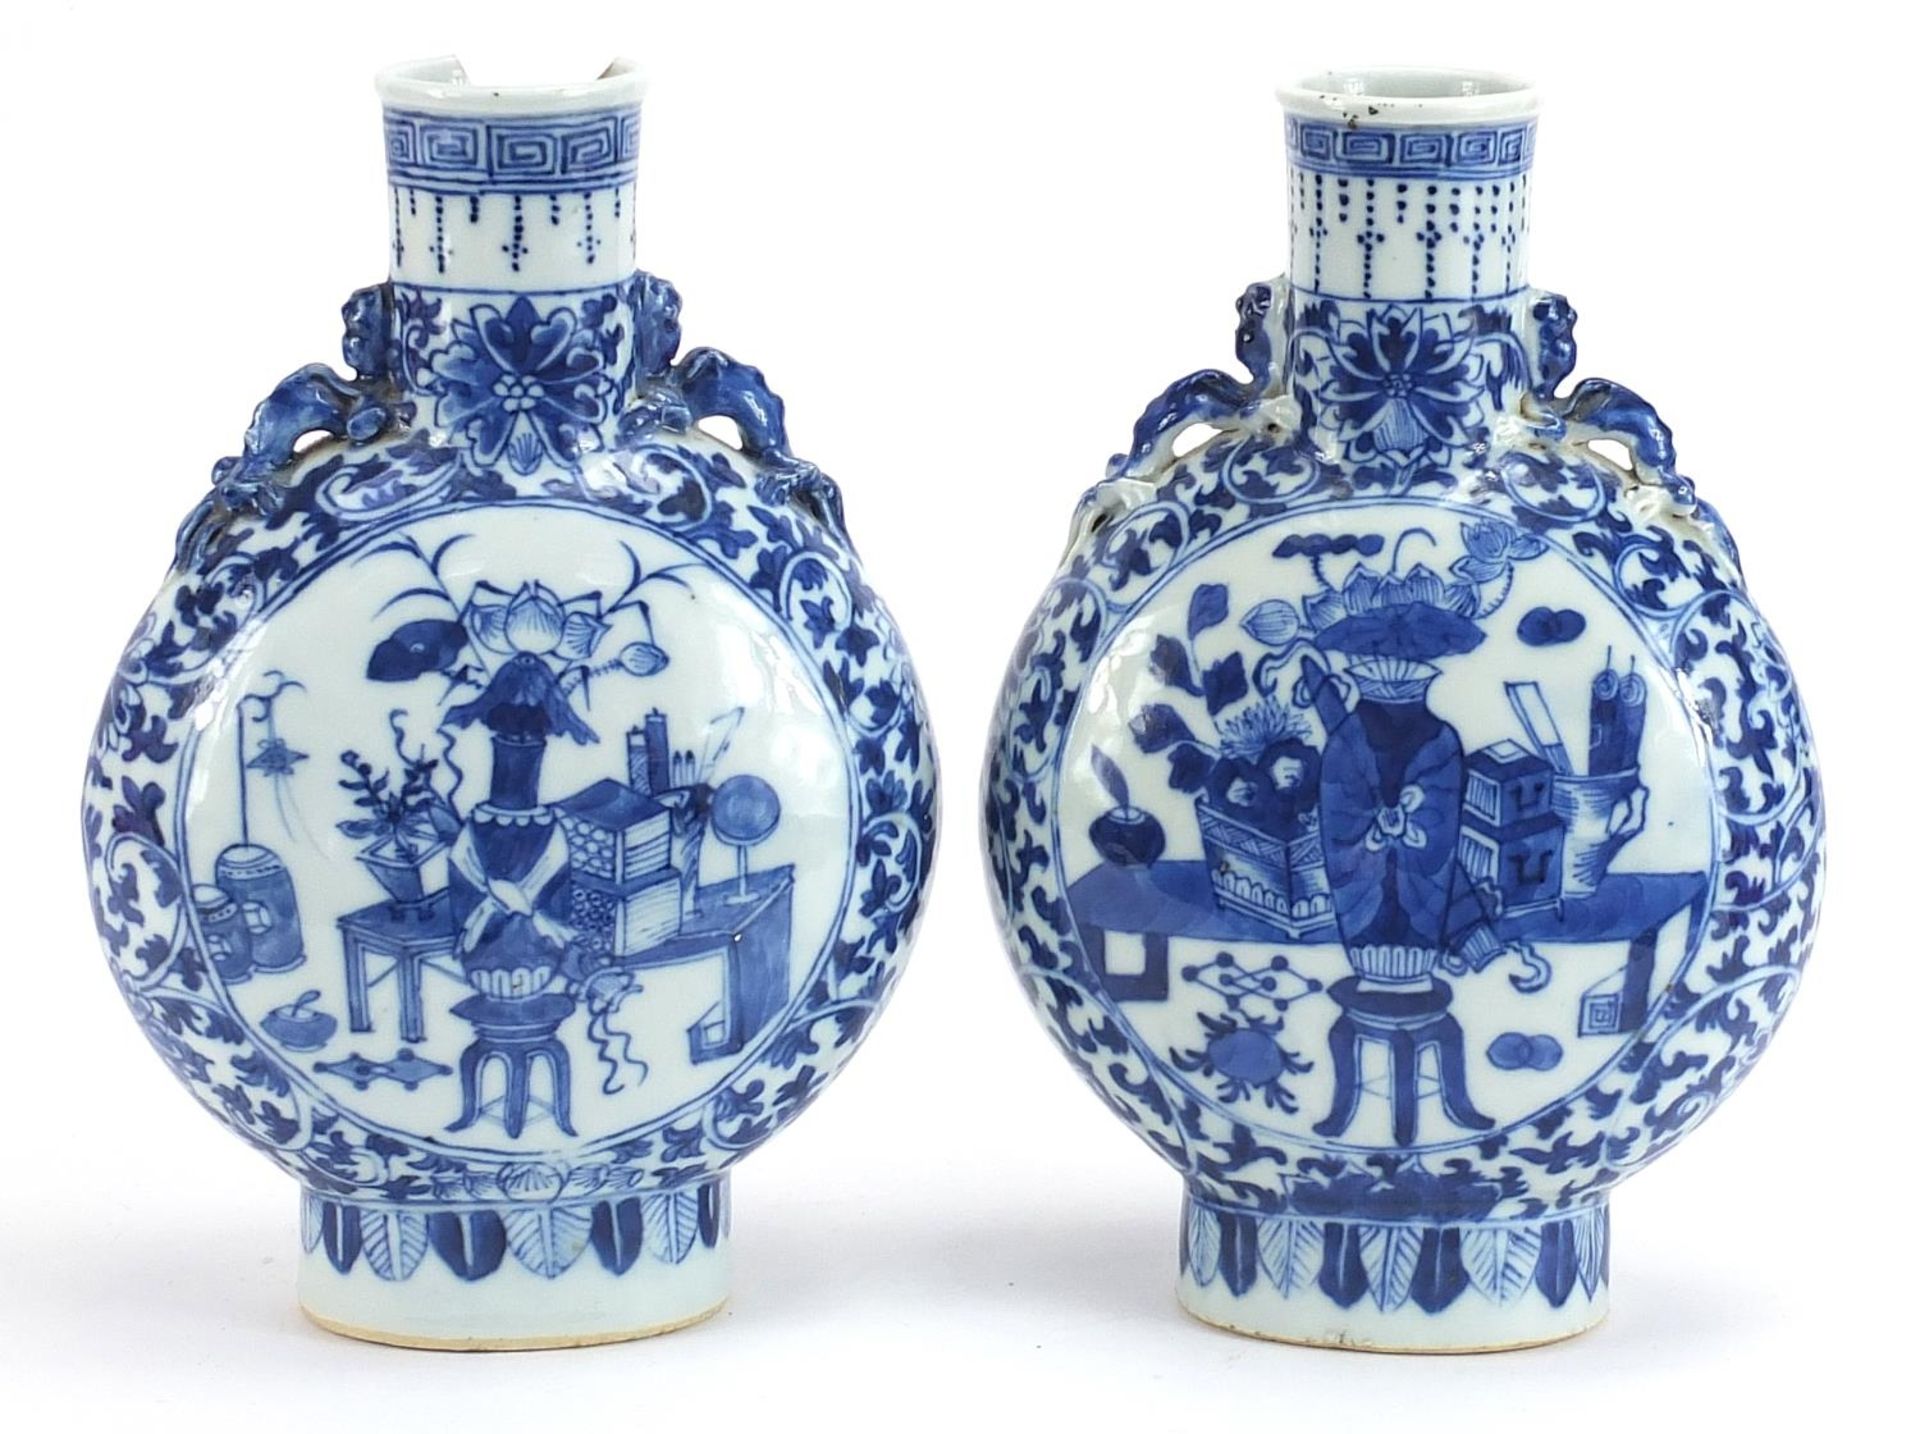 Pair of Chinese blue and white porcelain moon flasks with animalia handles, each hand painted with